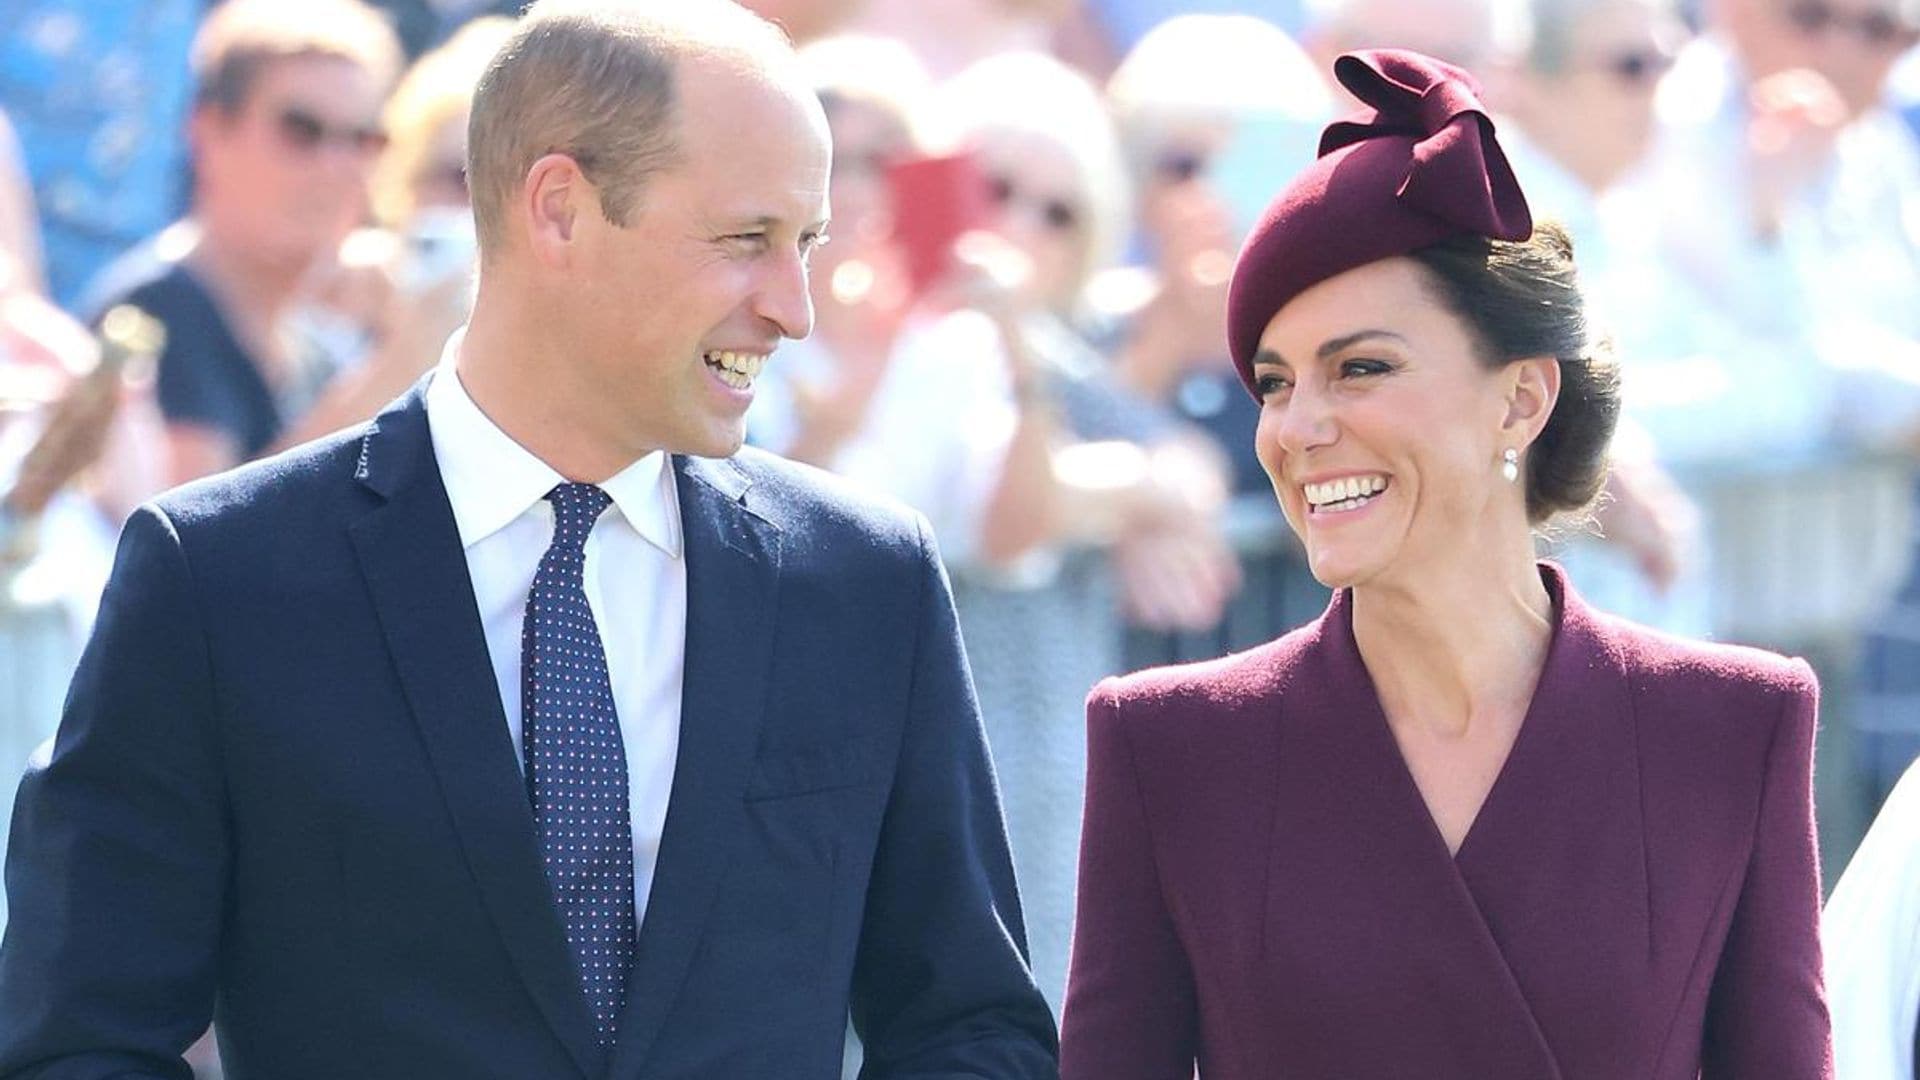 What Prince William said when asked if the Princess of Wales is getting better